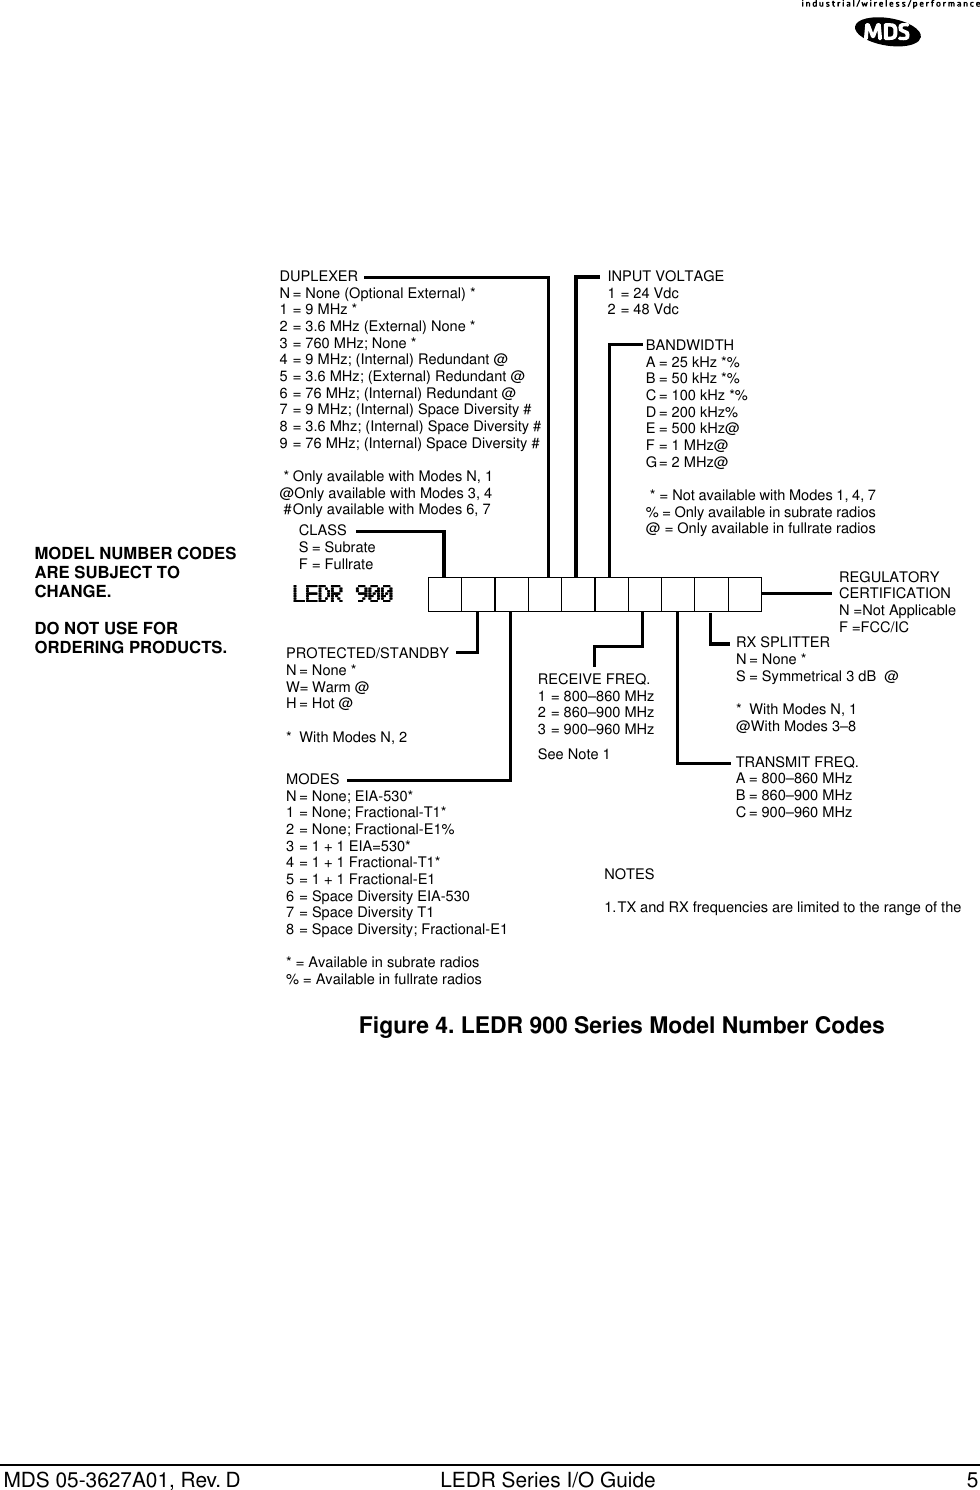  MDS 05-3627A01, Rev. D LEDR Series I/O Guide 5 Invisible place holder Figure 4. LEDR 900 Series Model Number CodesMODEL NUMBER CODES ARE SUBJECT TO CHANGE.DO NOT USE FOR ORDERING PRODUCTS.MODESN = None; EIA-530*1 = None; Fractional-T1*2 = None; Fractional-E1%3 = 1 + 1 EIA=530*4 = 1 + 1 Fractional-T1*5 = 1 + 1 Fractional-E16 = Space Diversity EIA-5307 = Space Diversity T18 = Space Diversity; Fractional-E1* = Available in subrate radios% = Available in fullrate radiosPROTECTED/STANDBYN = None *W= Warm @H = Hot @*  With Modes N, 2LLLLEEEEDDDDRRRR    999900000000DUPLEXERN = None (Optional External) *1 = 9 MHz *2 = 3.6 MHz (External) None *3 = 760 MHz; None *4 = 9 MHz; (Internal) Redundant @5 = 3.6 MHz; (External) Redundant @6 = 76 MHz; (Internal) Redundant @7 = 9 MHz; (Internal) Space Diversity #8 = 3.6 Mhz; (Internal) Space Diversity #9 = 76 MHz; (Internal) Space Diversity # * Only available with Modes N, 1@Only available with Modes 3, 4 #Only available with Modes 6, 7BANDWIDTHA = 25 kHz *%B = 50 kHz *%C = 100 kHz *%D = 200 kHz%E = 500 kHz@F = 1 MHz@G= 2 MHz@ * = Not available with Modes 1, 4, 7% = Only available in subrate radios@ = Only available in fullrate radiosNOTES1.TX and RX frequencies are limited to the range of the TRANSMIT FREQ.A = 800–860 MHzB = 860–900 MHzC = 900–960 MHzREGULATORY CERTIFICATIONN =Not ApplicableF =FCC/ICRX SPLITTERN = None *S = Symmetrical 3 dB  @* With Modes N, 1@With Modes 3–8INPUT VOLTAGE1 = 24 Vdc2 = 48 VdcRECEIVE FREQ.1 = 800–860 MHz2 = 860–900 MHz3 = 900–960 MHzSee Note 1CLASSS = SubrateF = Fullrate